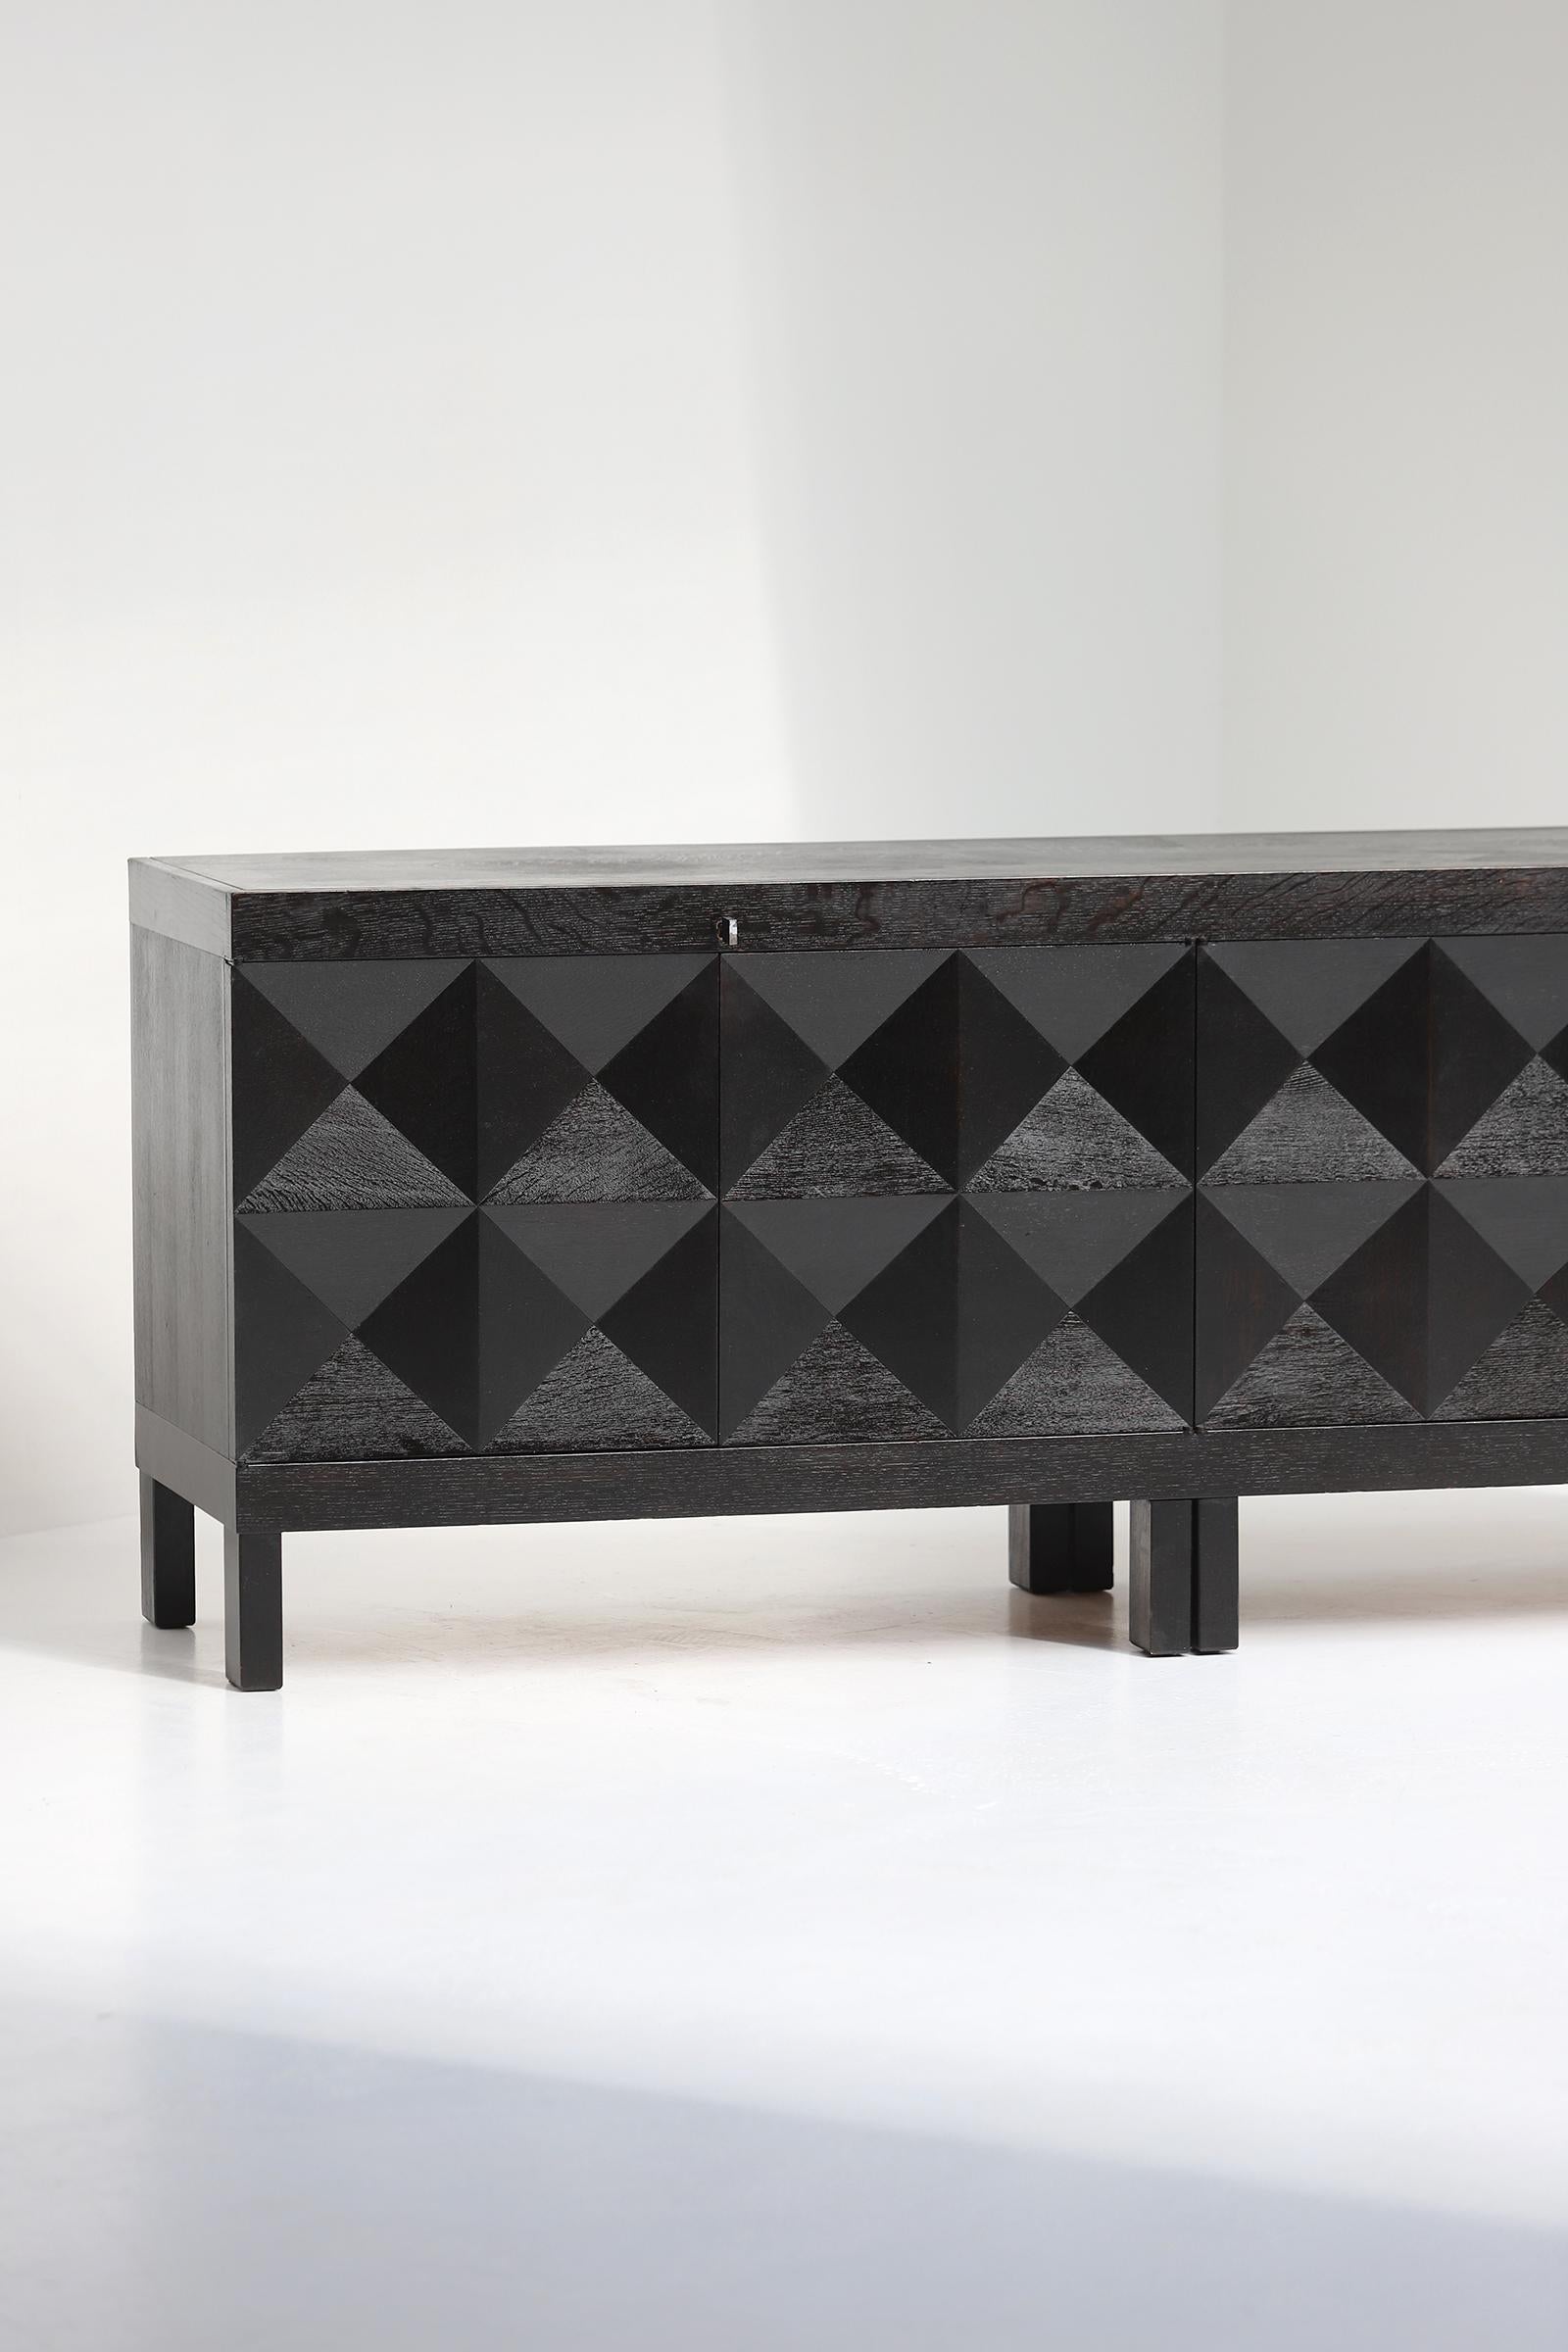 Beautiful and quality crafted sideboard with op-art doors designed by J. Batenburg for MI, Belgium 1969. These quality Belgian made furniture were definitely built during the late 60s and early 70s. Some dealers do sell this as a product from De